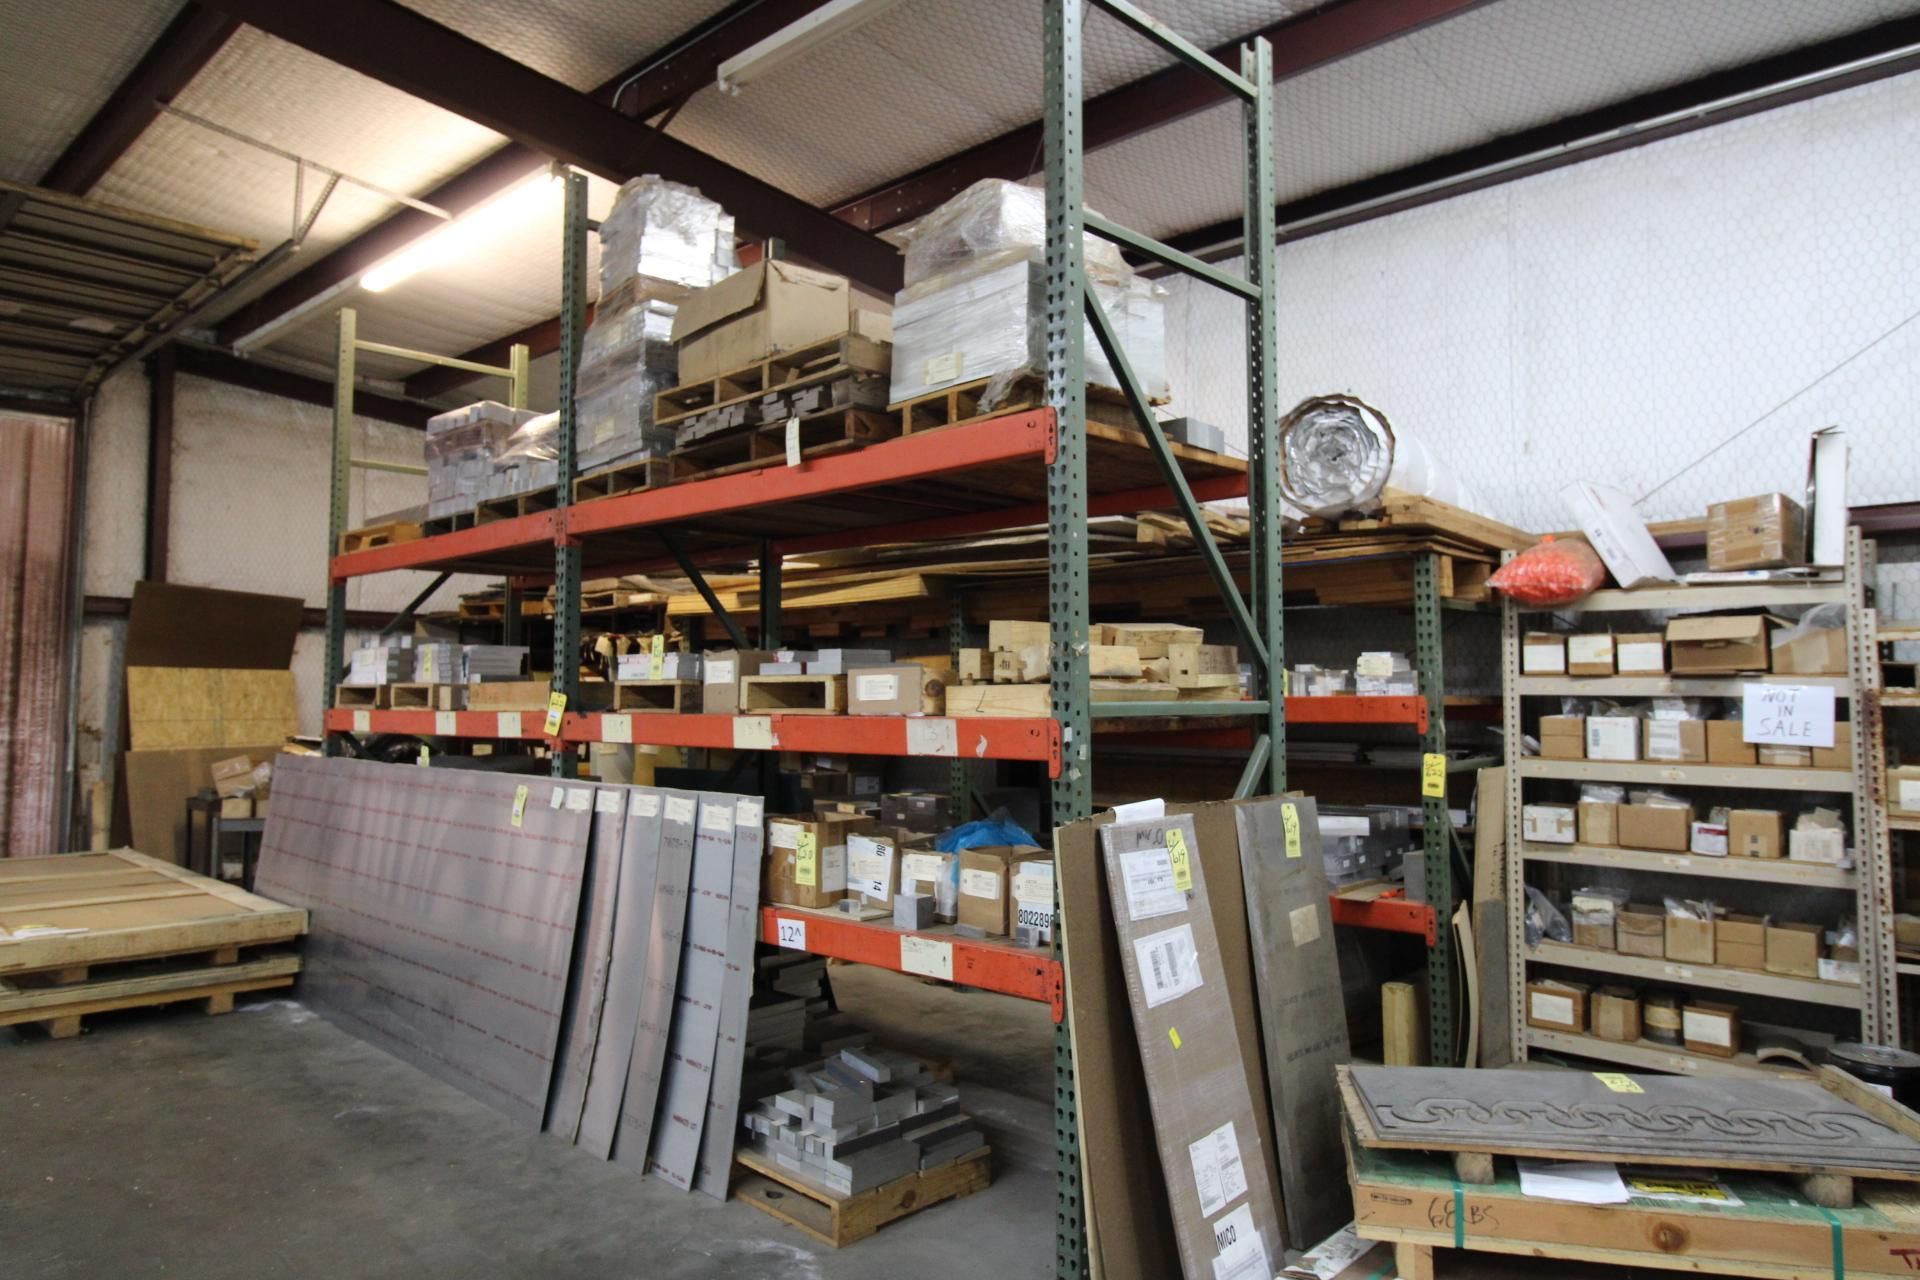 LOT OF PALLET RACK SECTIONS (5): (2) 3-tier, 42" x 96" x 144" tall, (3) 2-tier, 42" x 96" x 84" tall